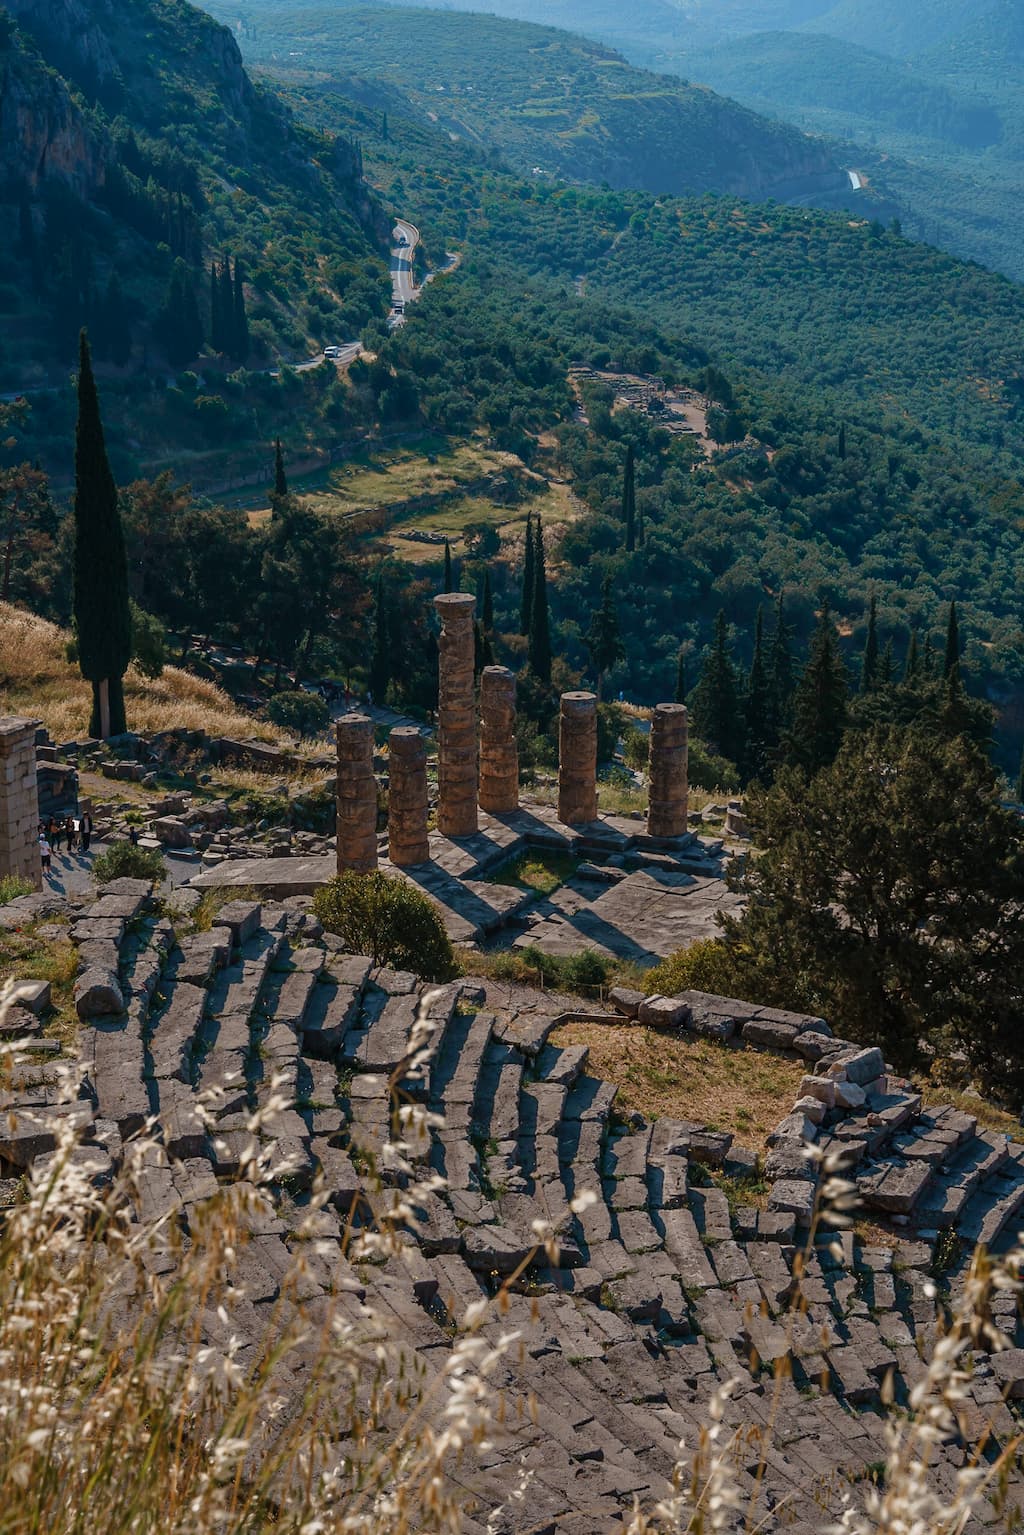 The ancient theatre of Delphi is the main attraction of tours from Athens to Delphi.